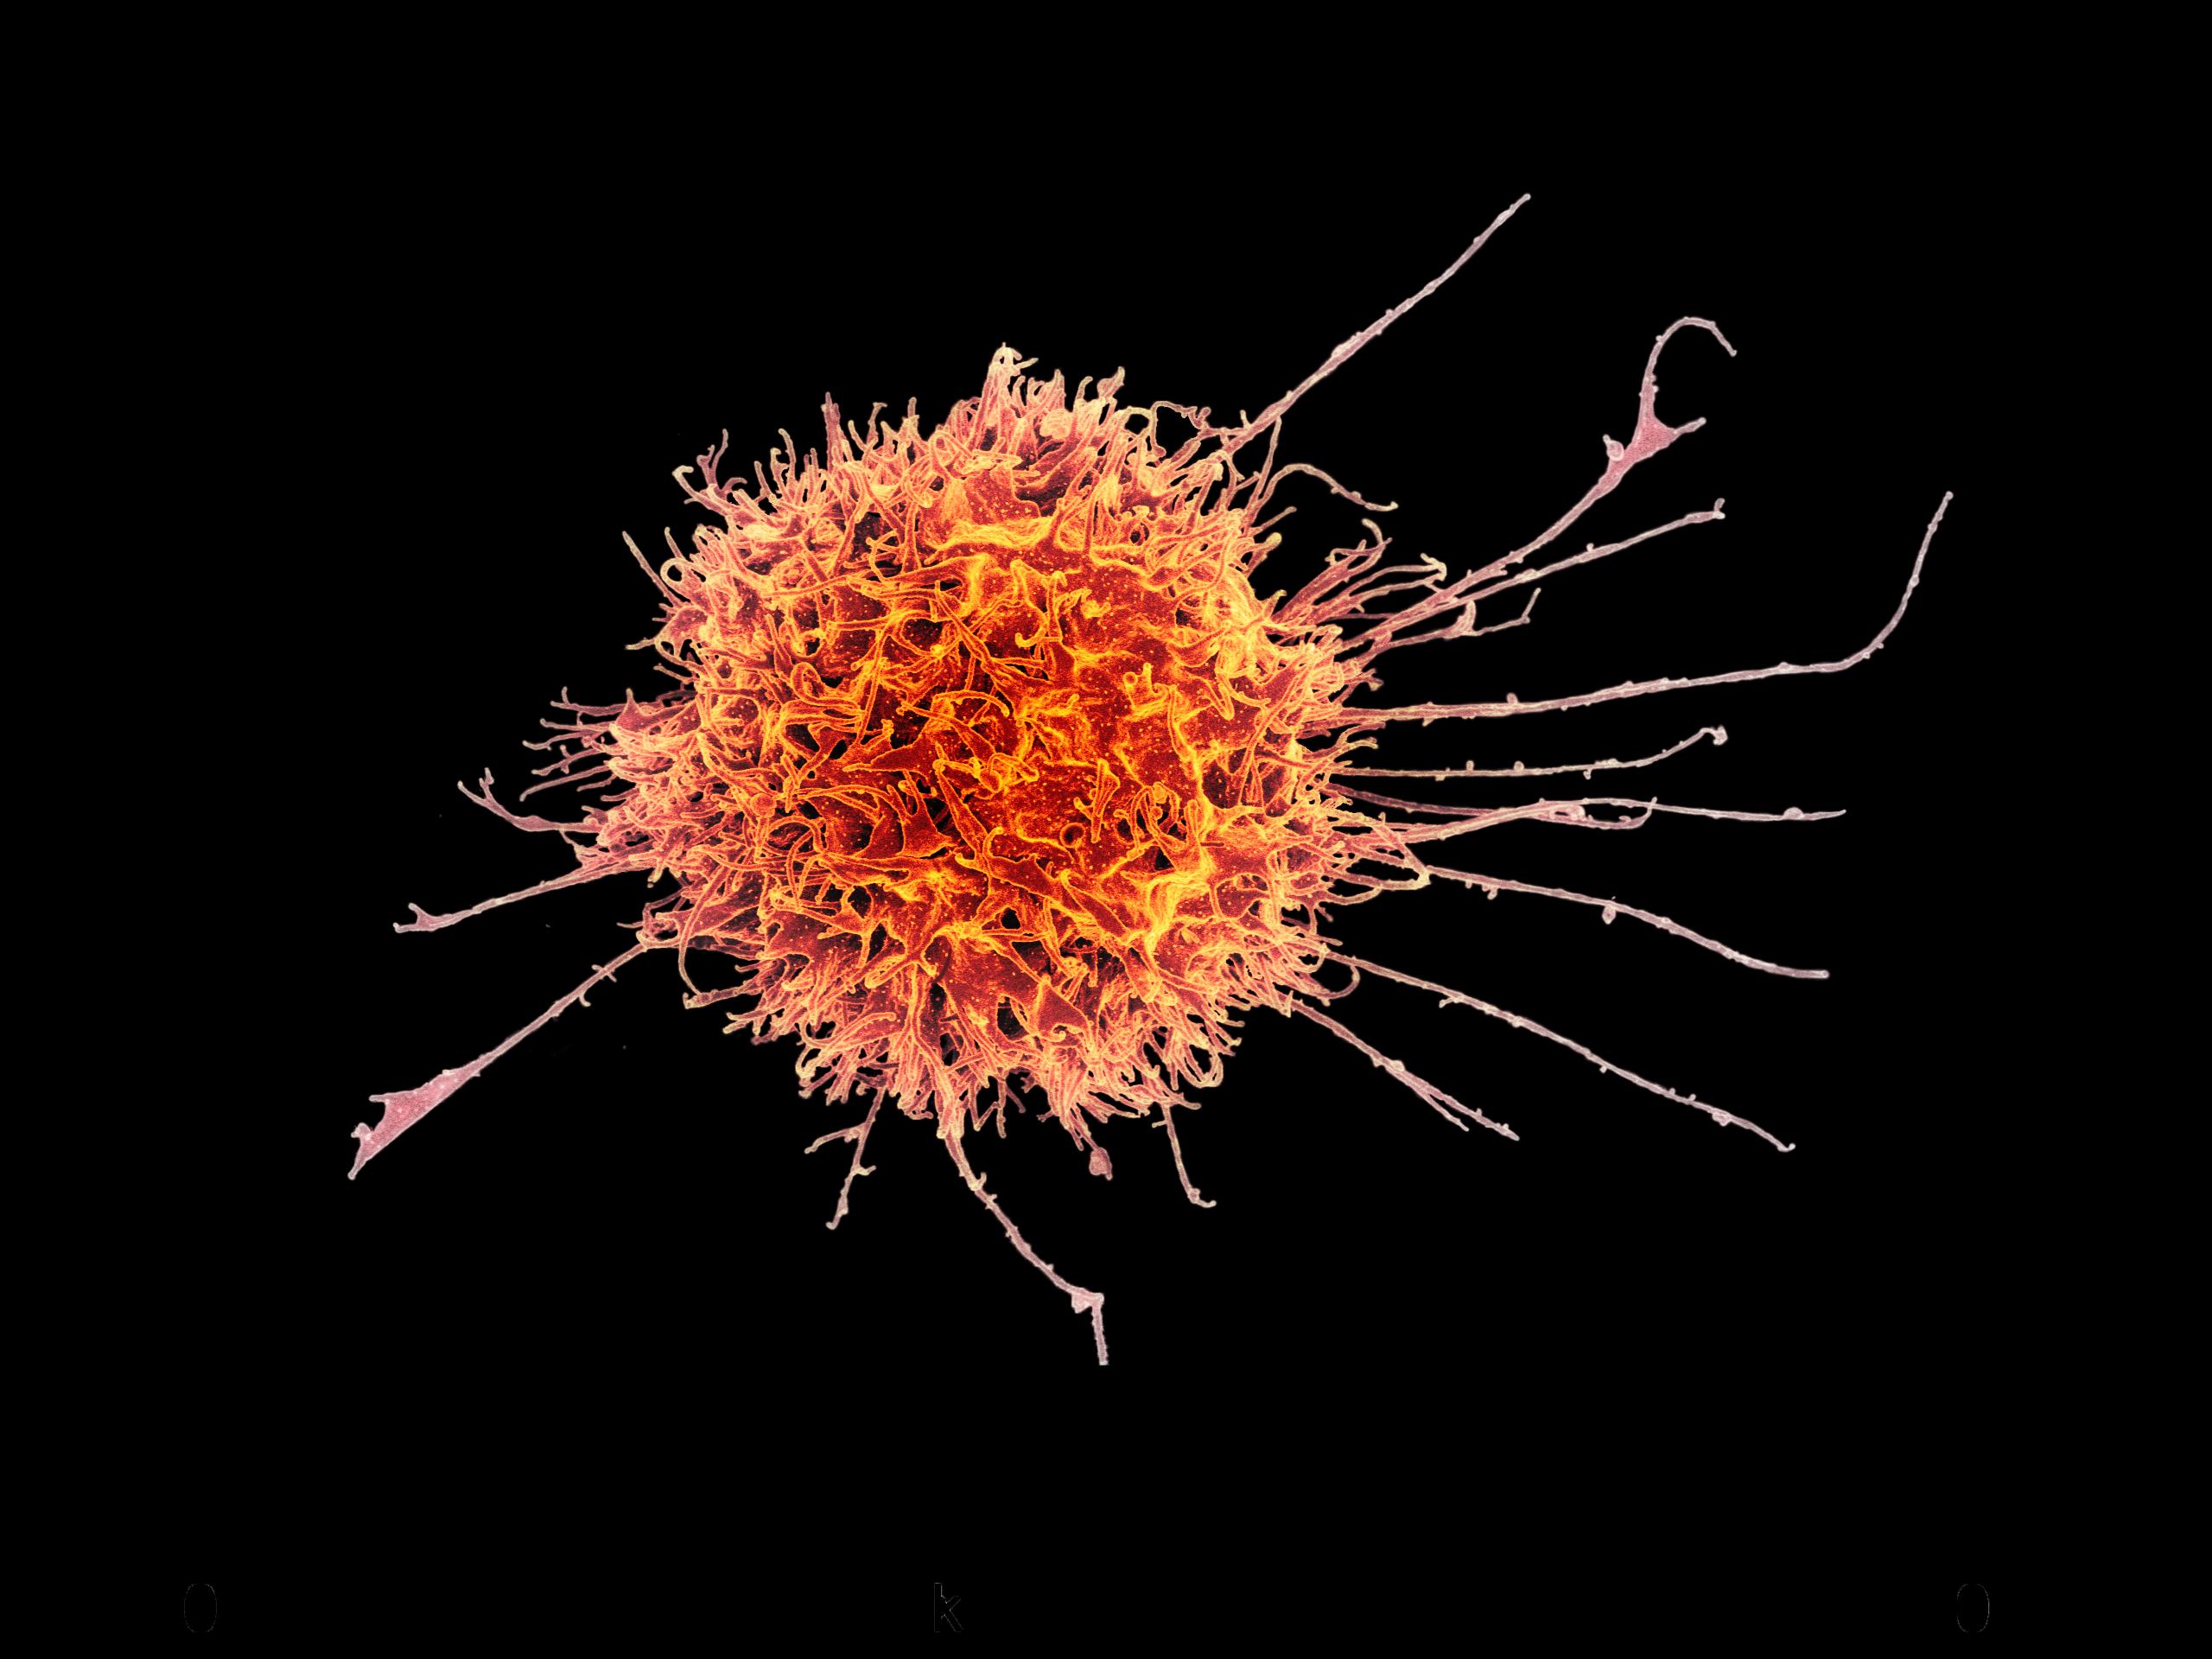 An electron micrograph has been colorized to show a spiny, tumbleweed-like natural killer cell in orange.